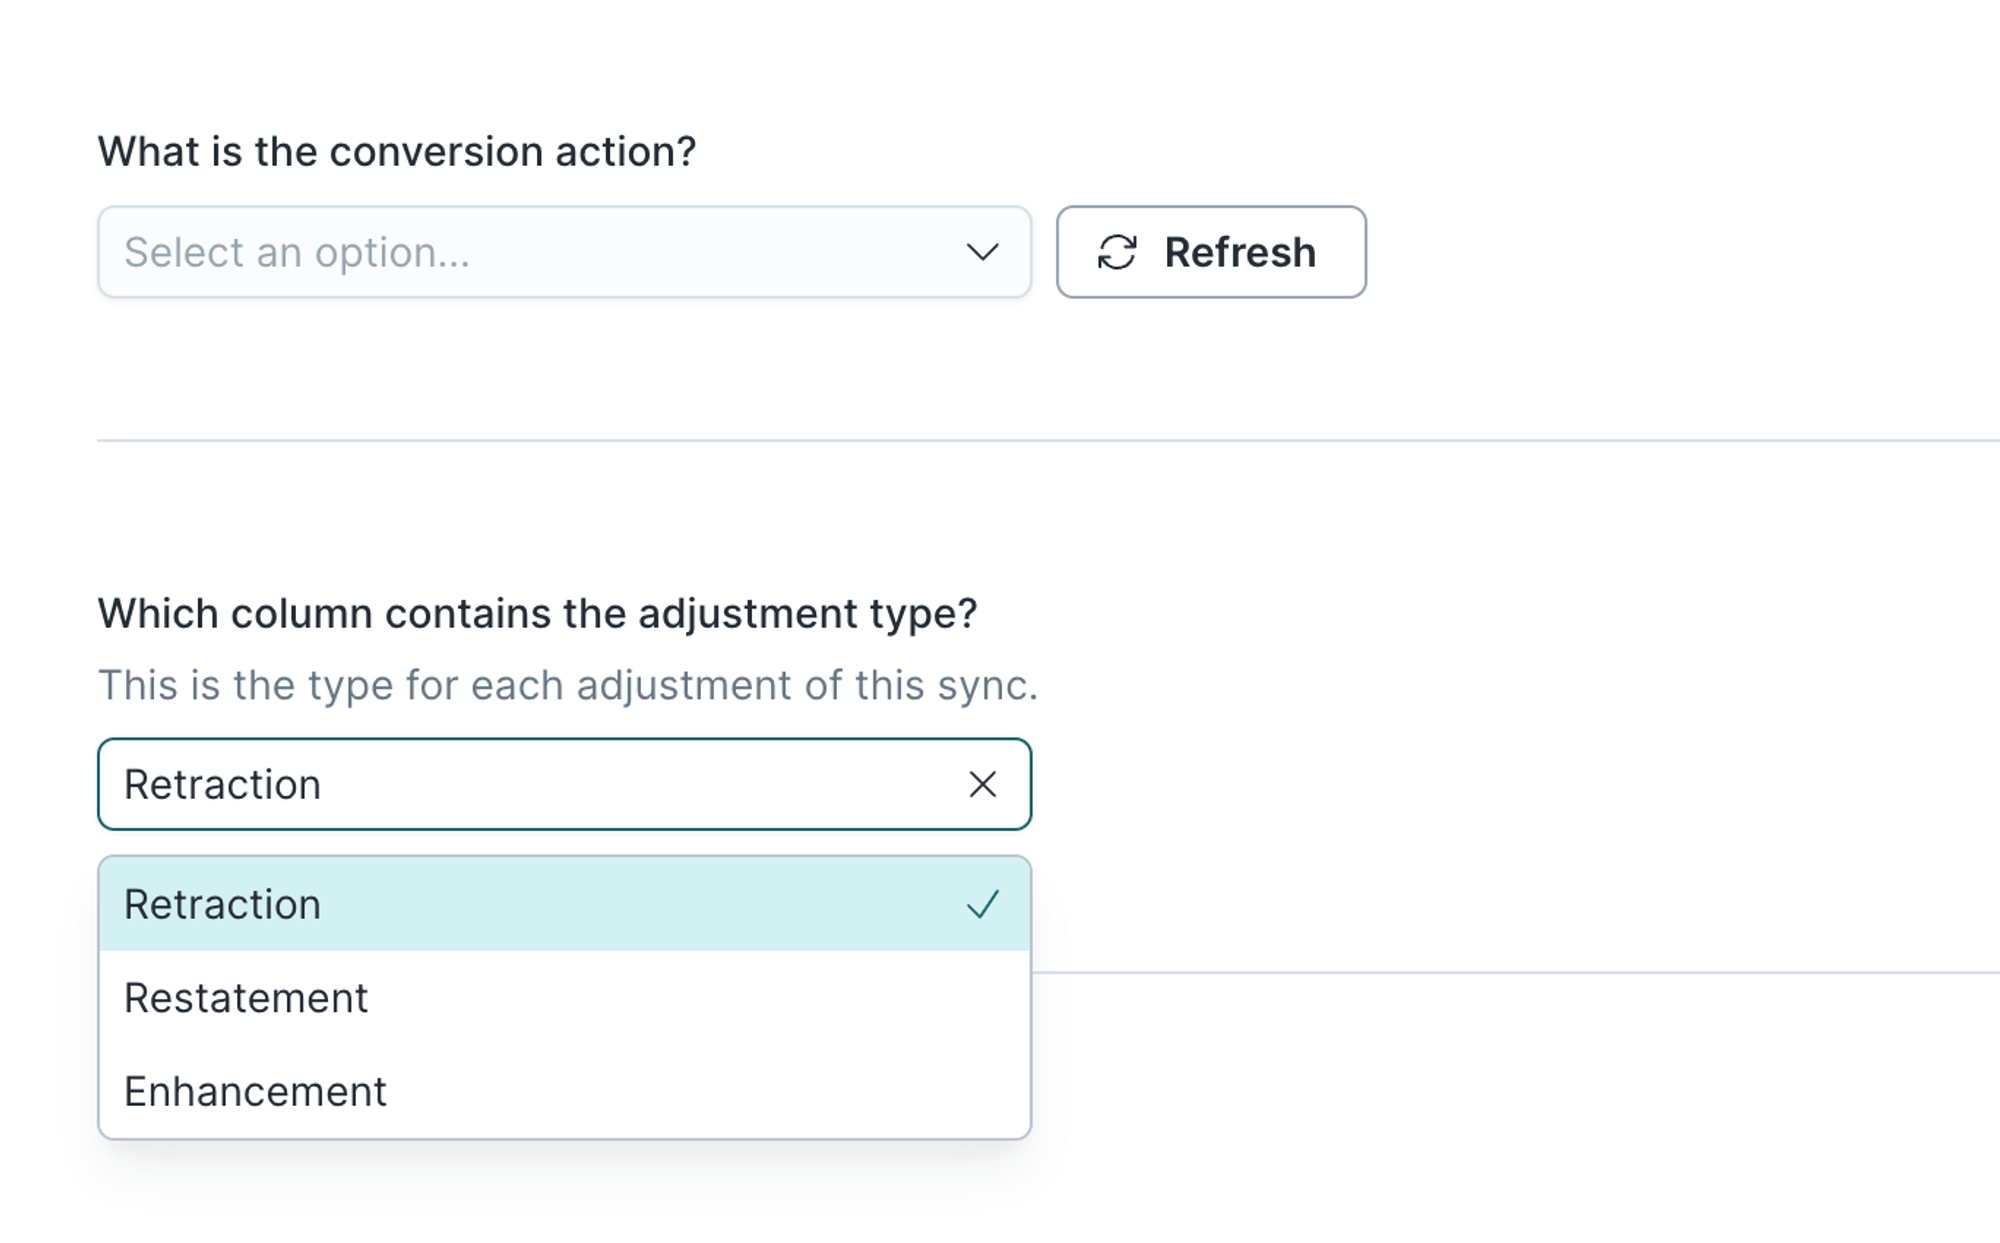 Select conversion action and adjustment type